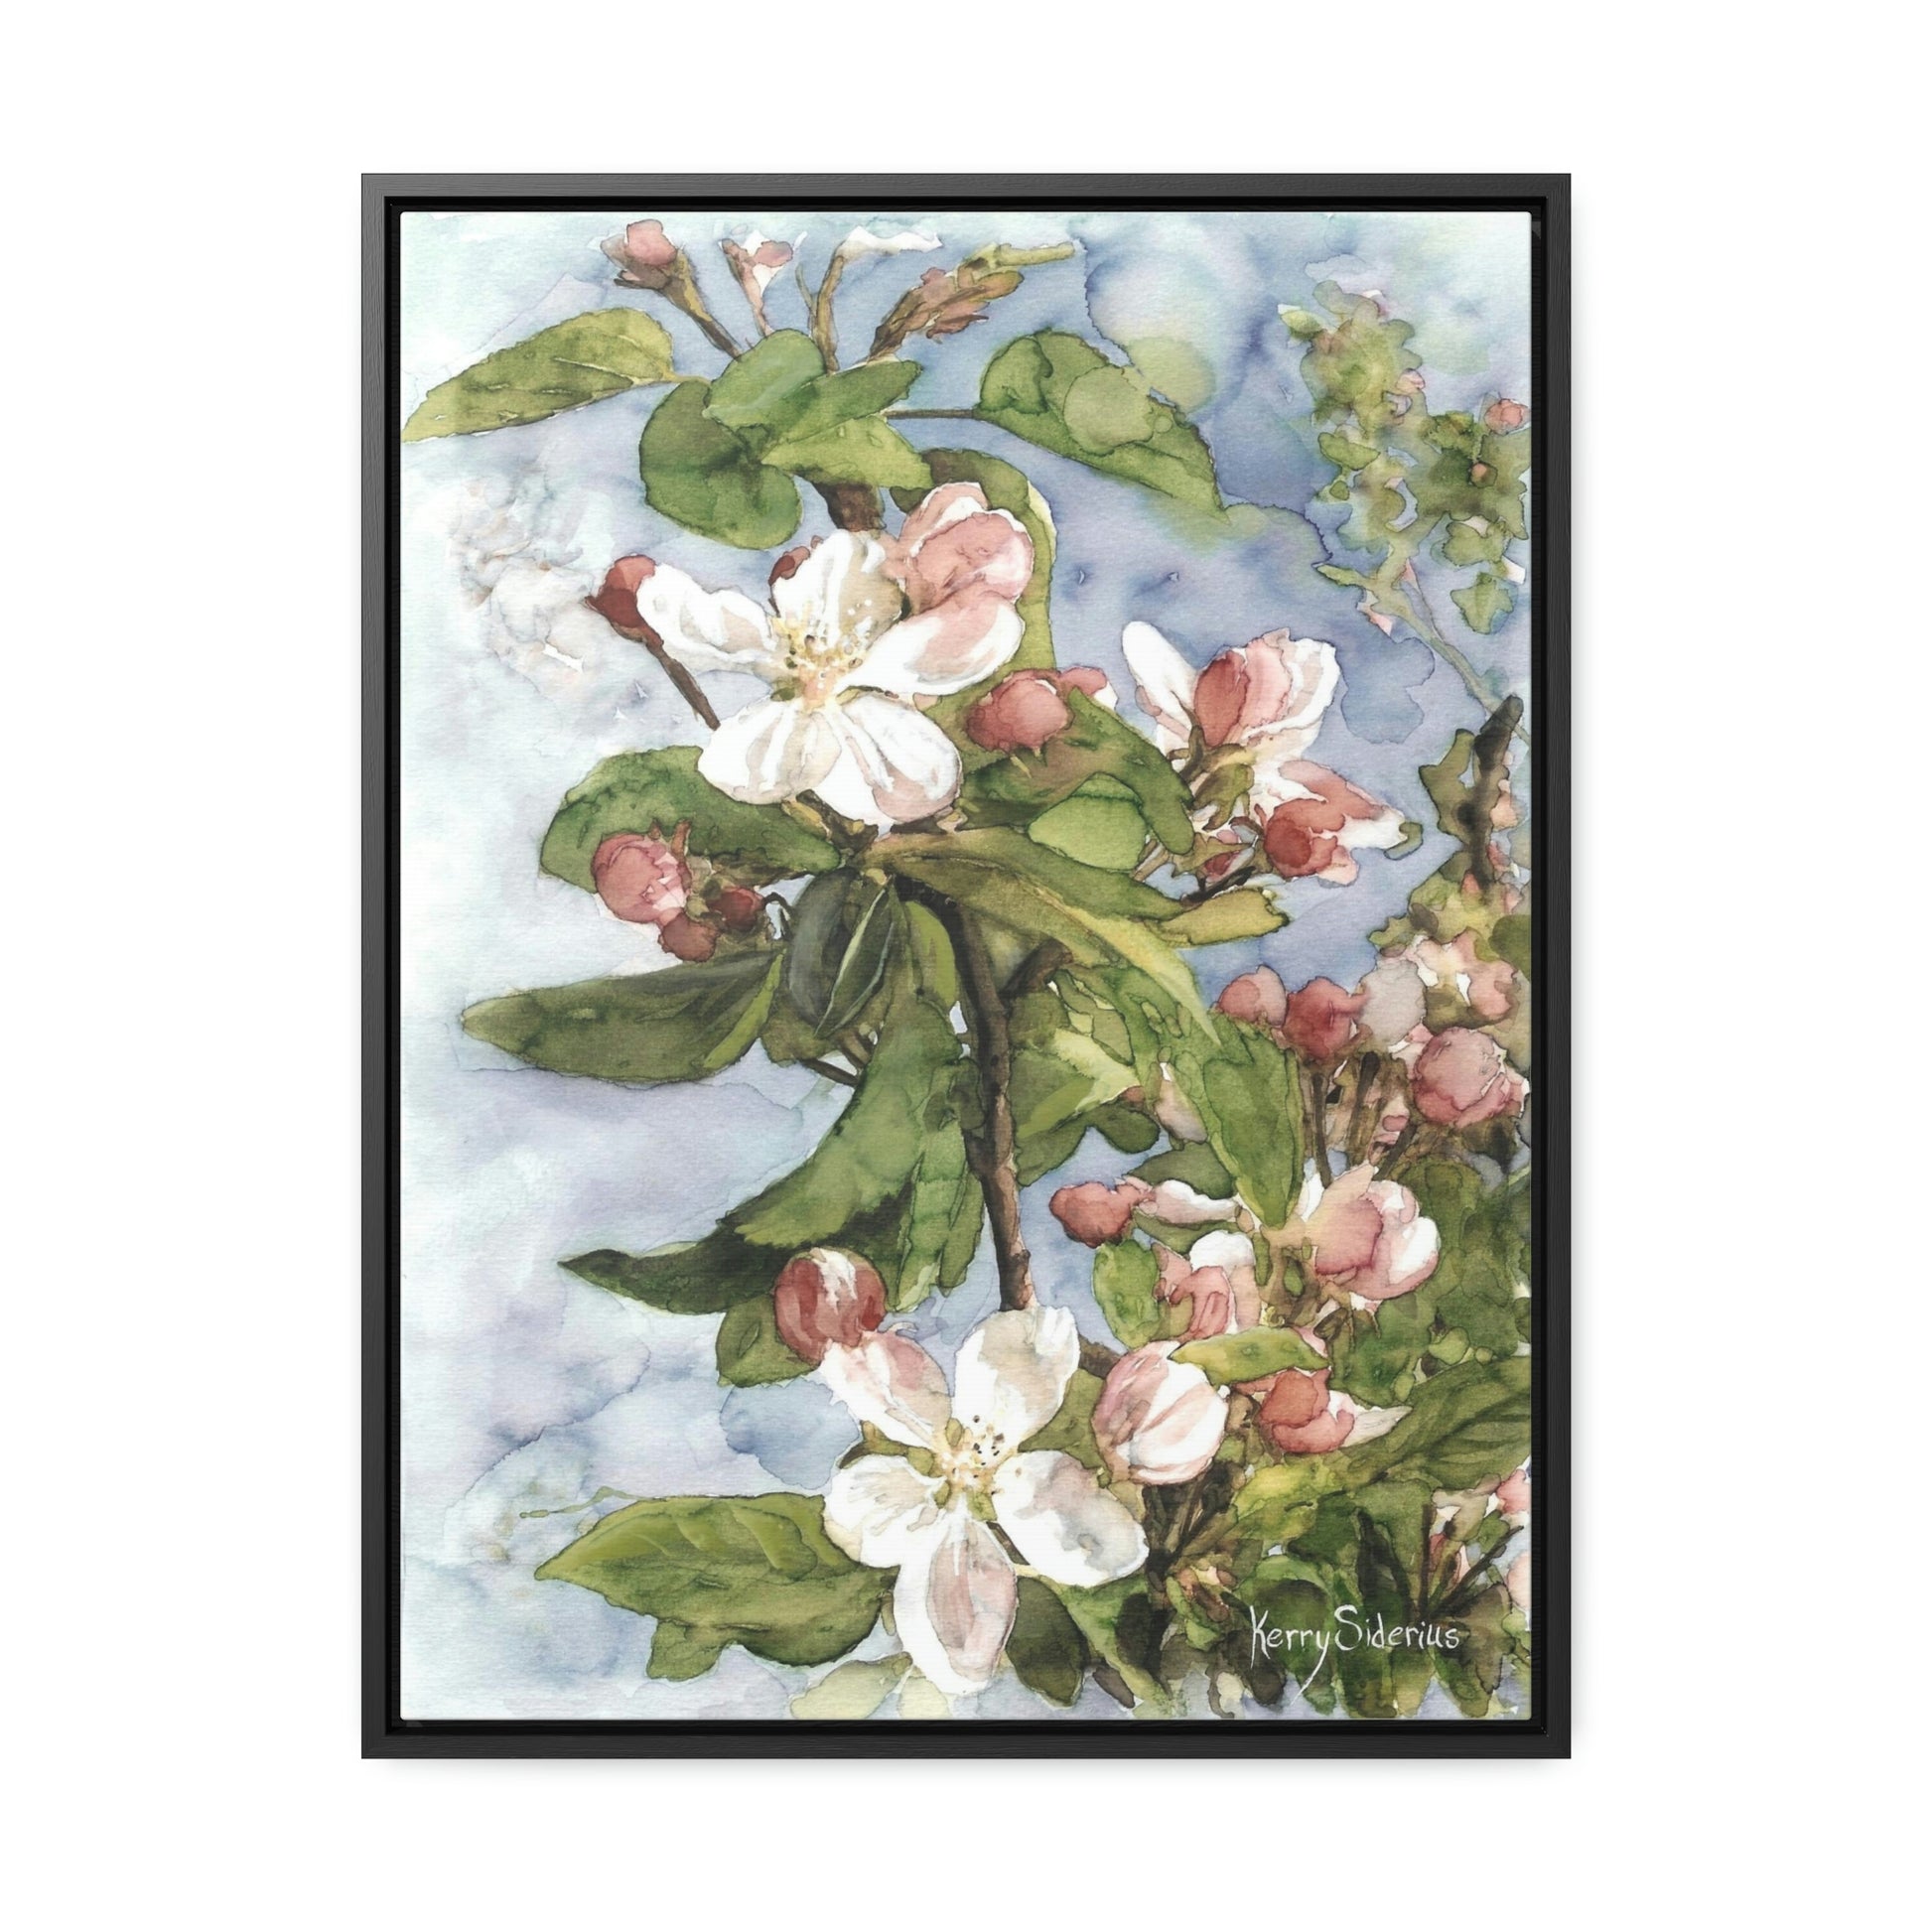 "Wenatchee Apple Blossoms" Gallery Wrapped Wood Framed Canvas (Walnut & Black) - Kerry Siderius Art 